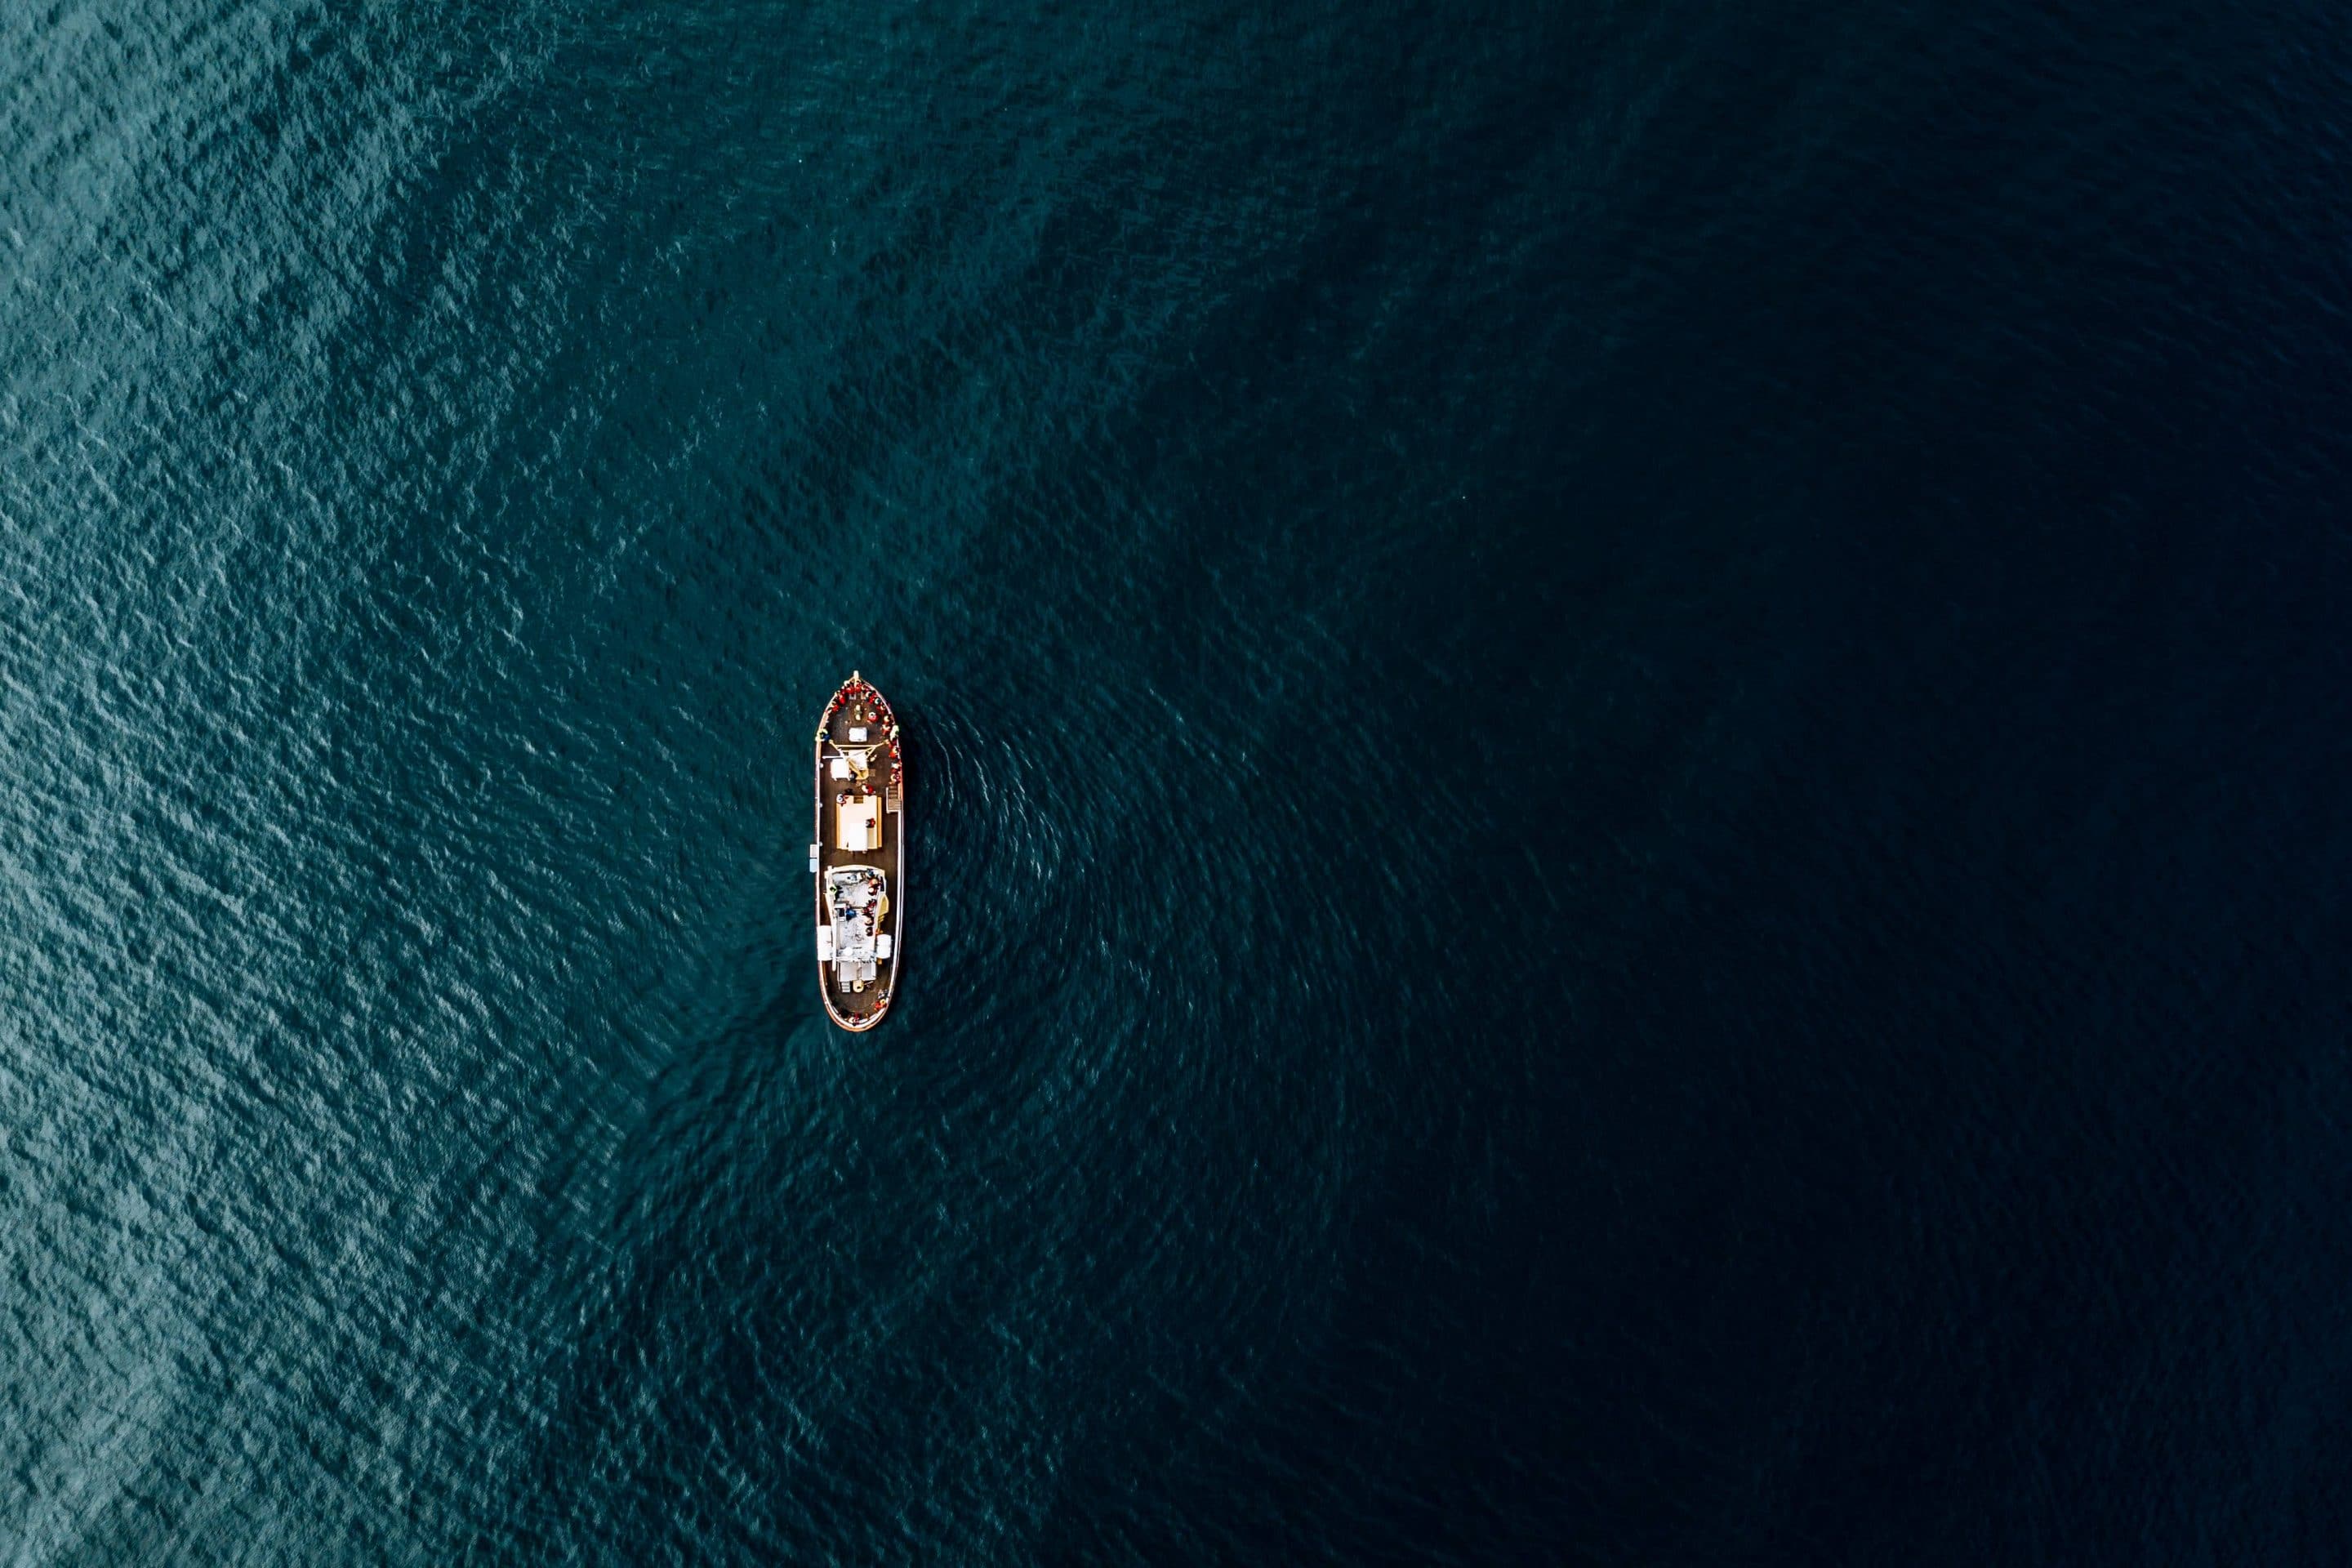 A school of humpback whales captured via drone in the ocean near the Icelandic coast playfully engaging with a ship by photographer Michael Schauer